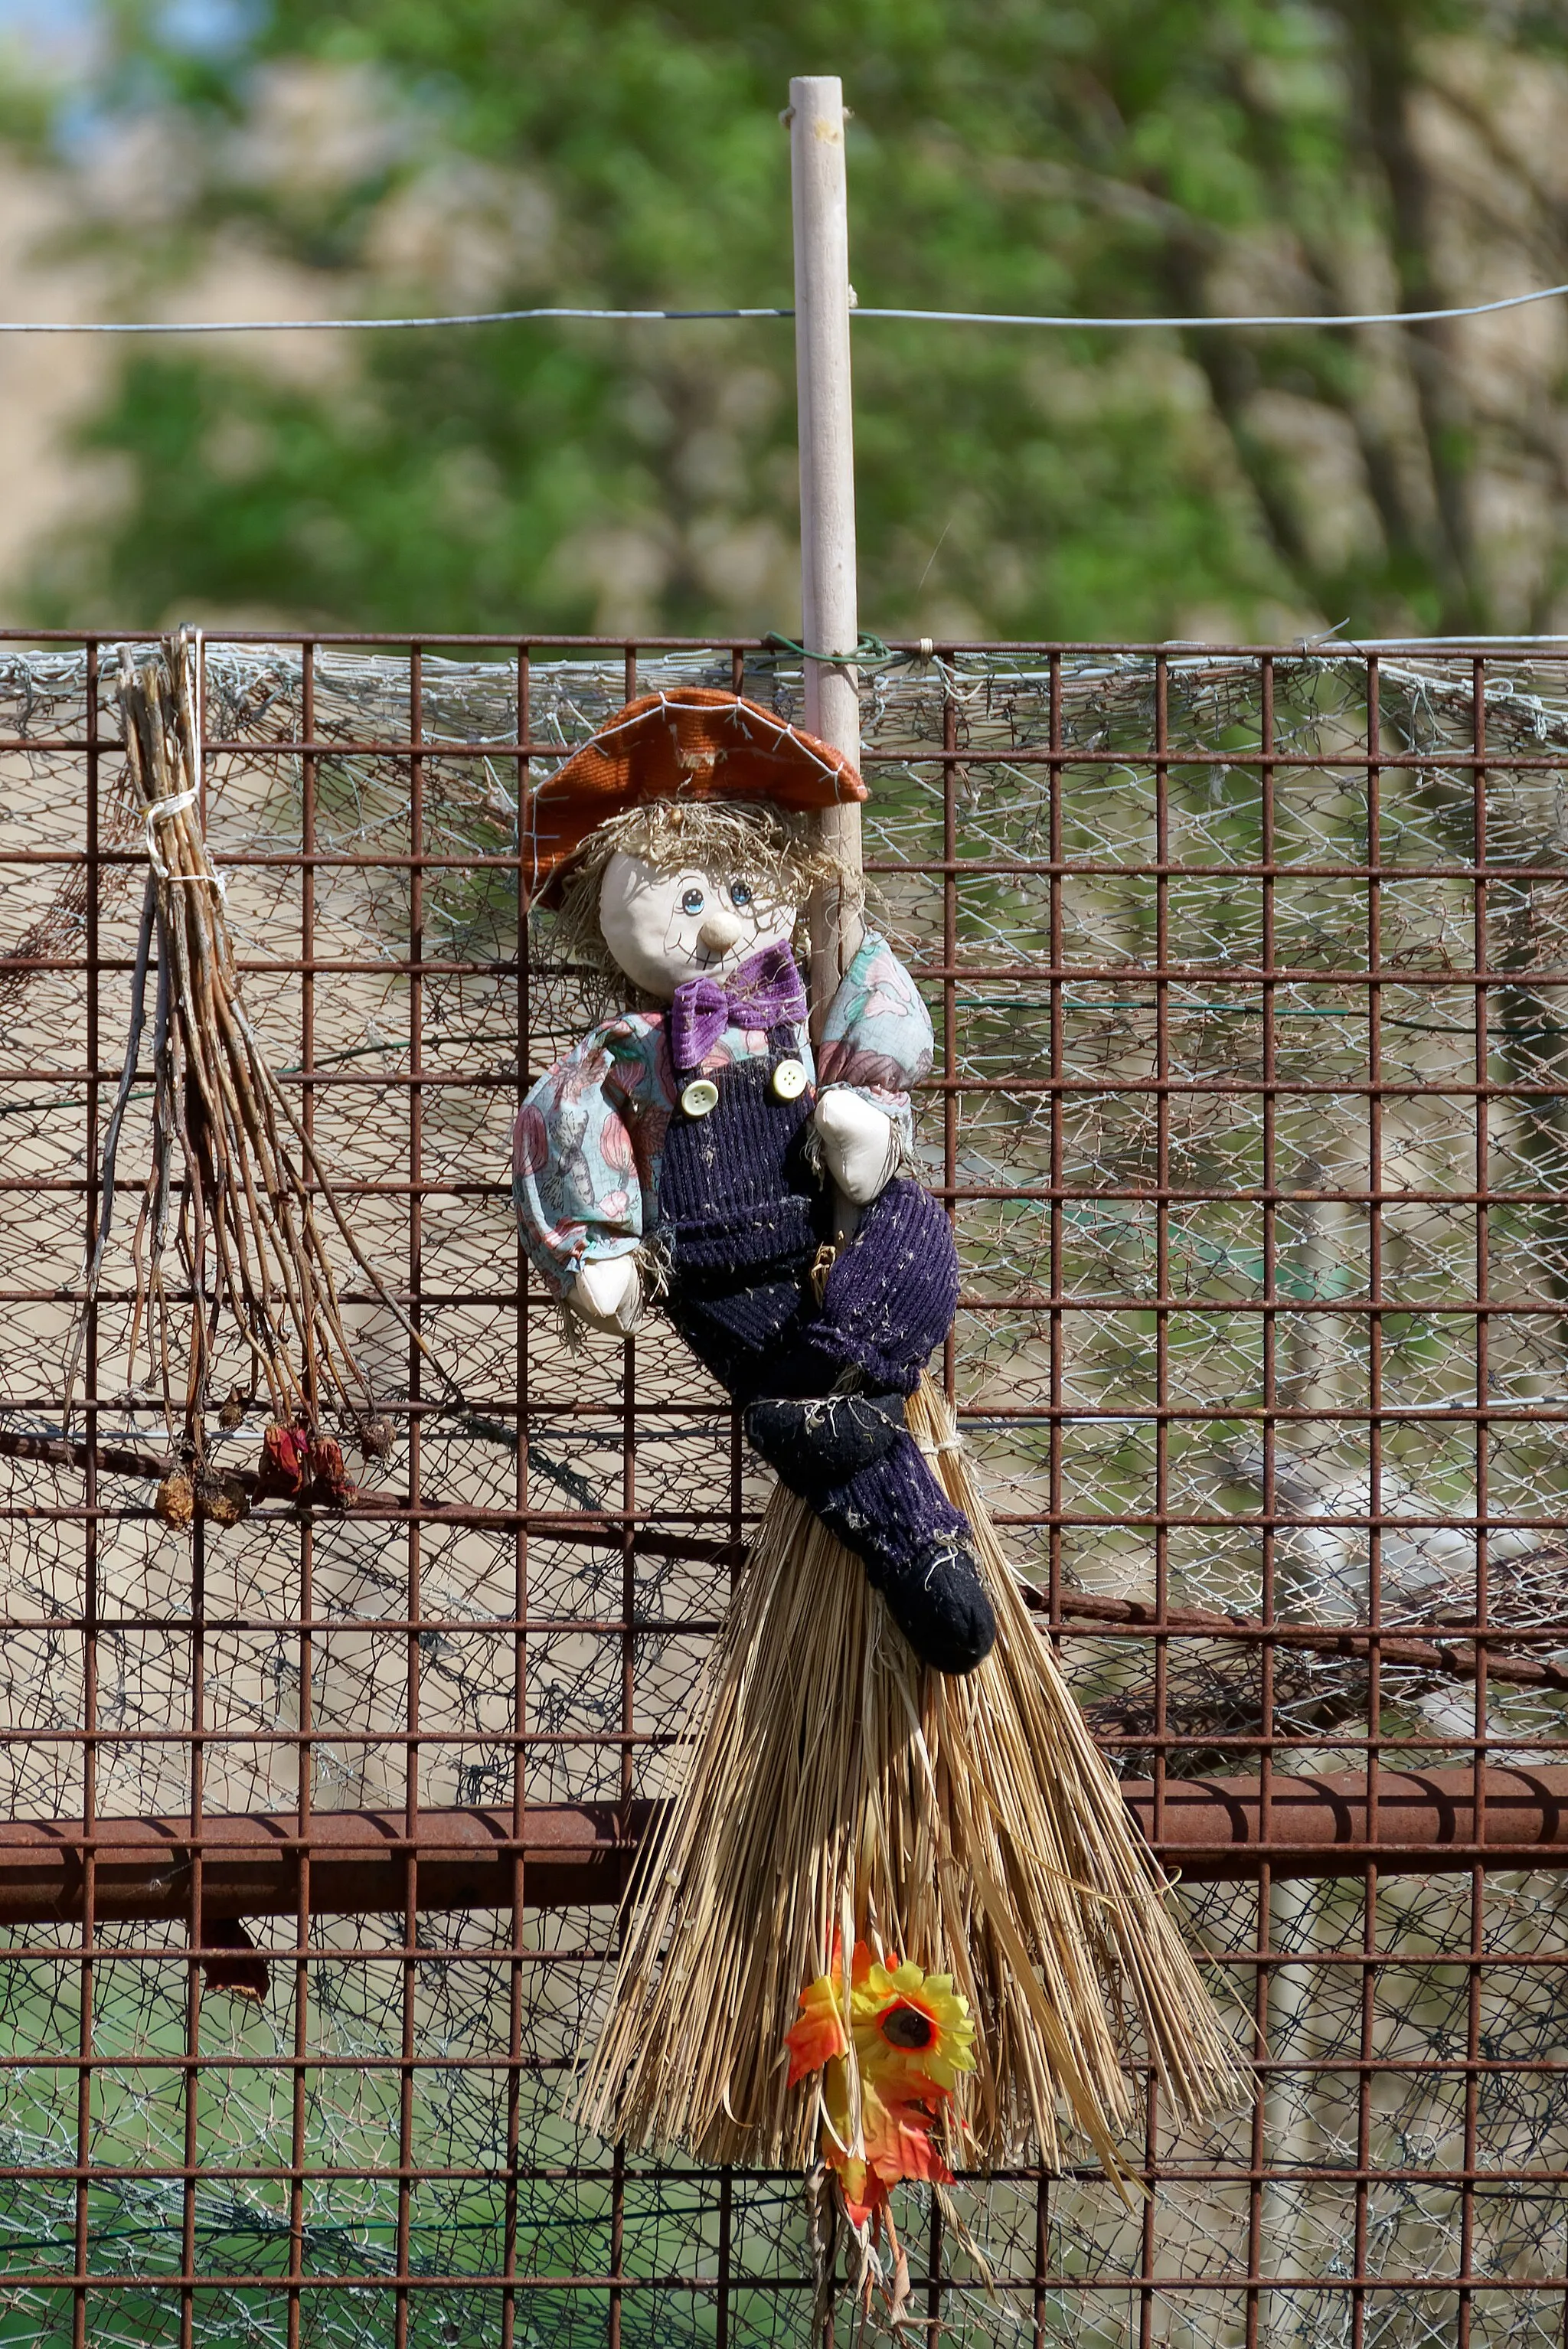 Photo showing: Doll with a broom on a farm gate in Mörbisch am See, Austria